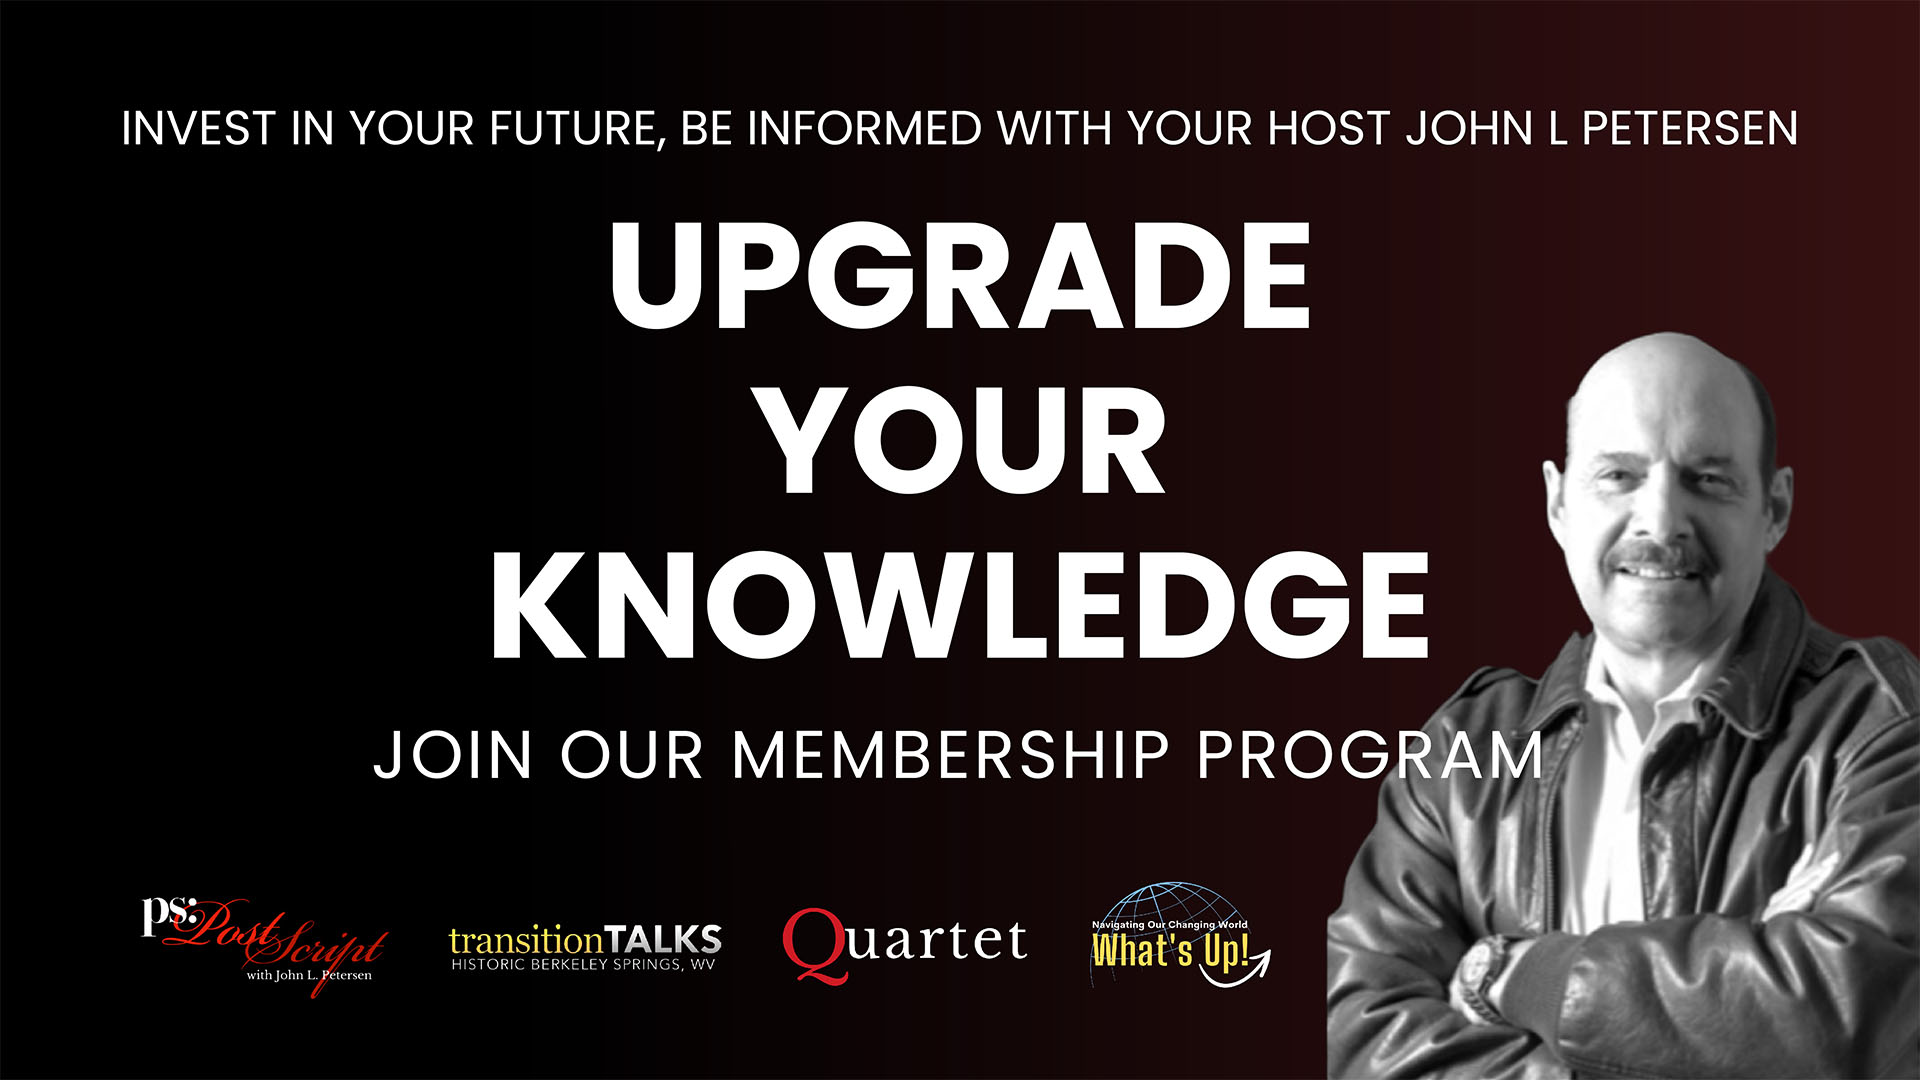 Become a member, invest in your future, with John L. Petersen